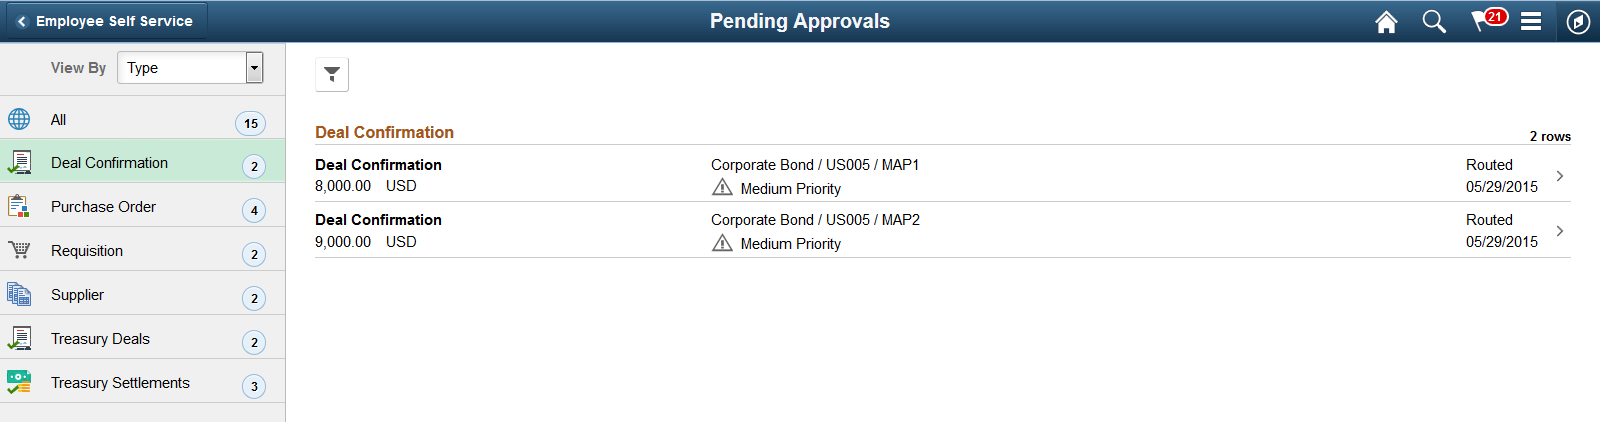 Deal Confirmation - Pending Approvals page (LFF)